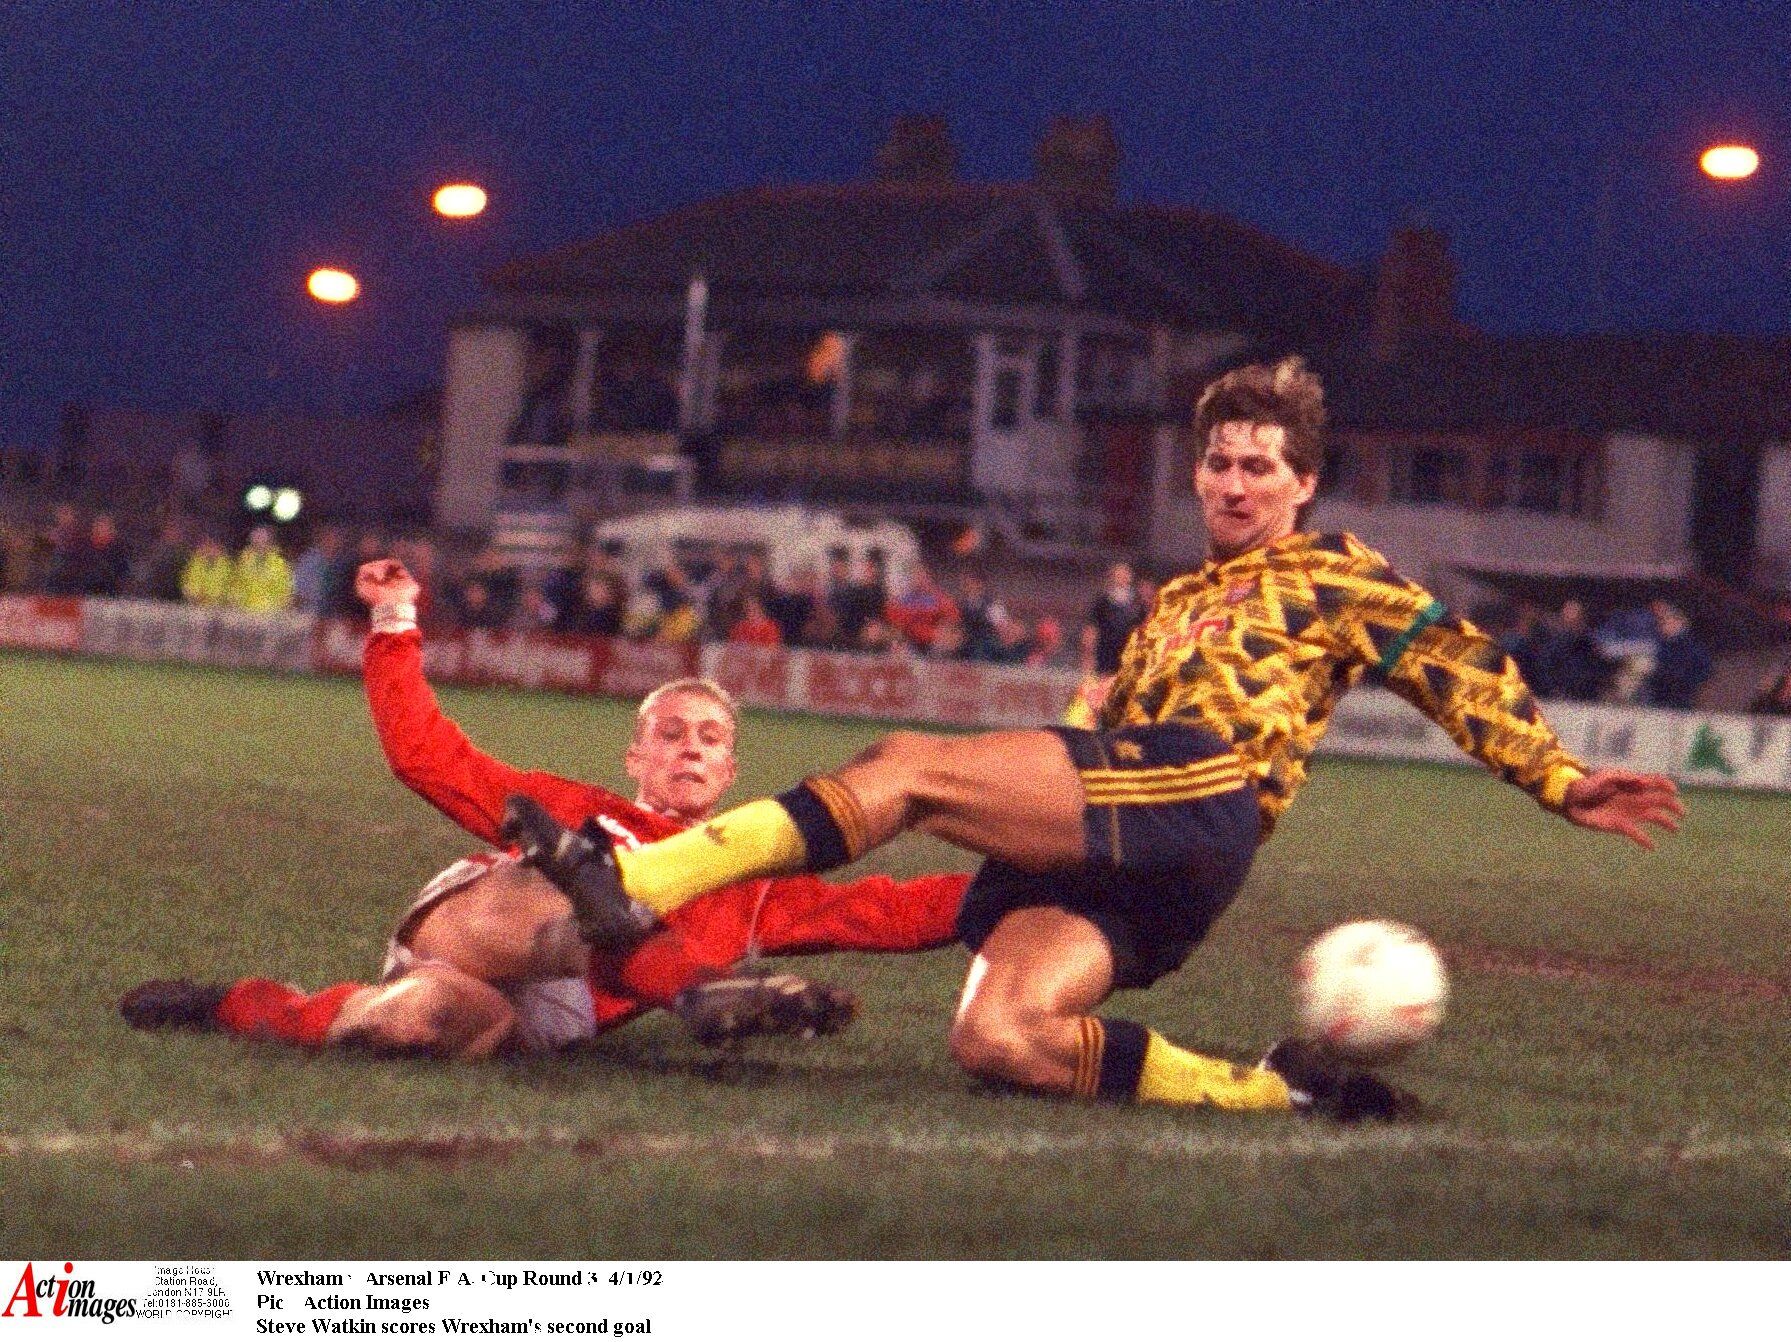 Wrexham v Arsenal FA Cup  Round 3  4/1/92 
Pic : Action Images 
Steve Watkin scores Wrexham's second goal